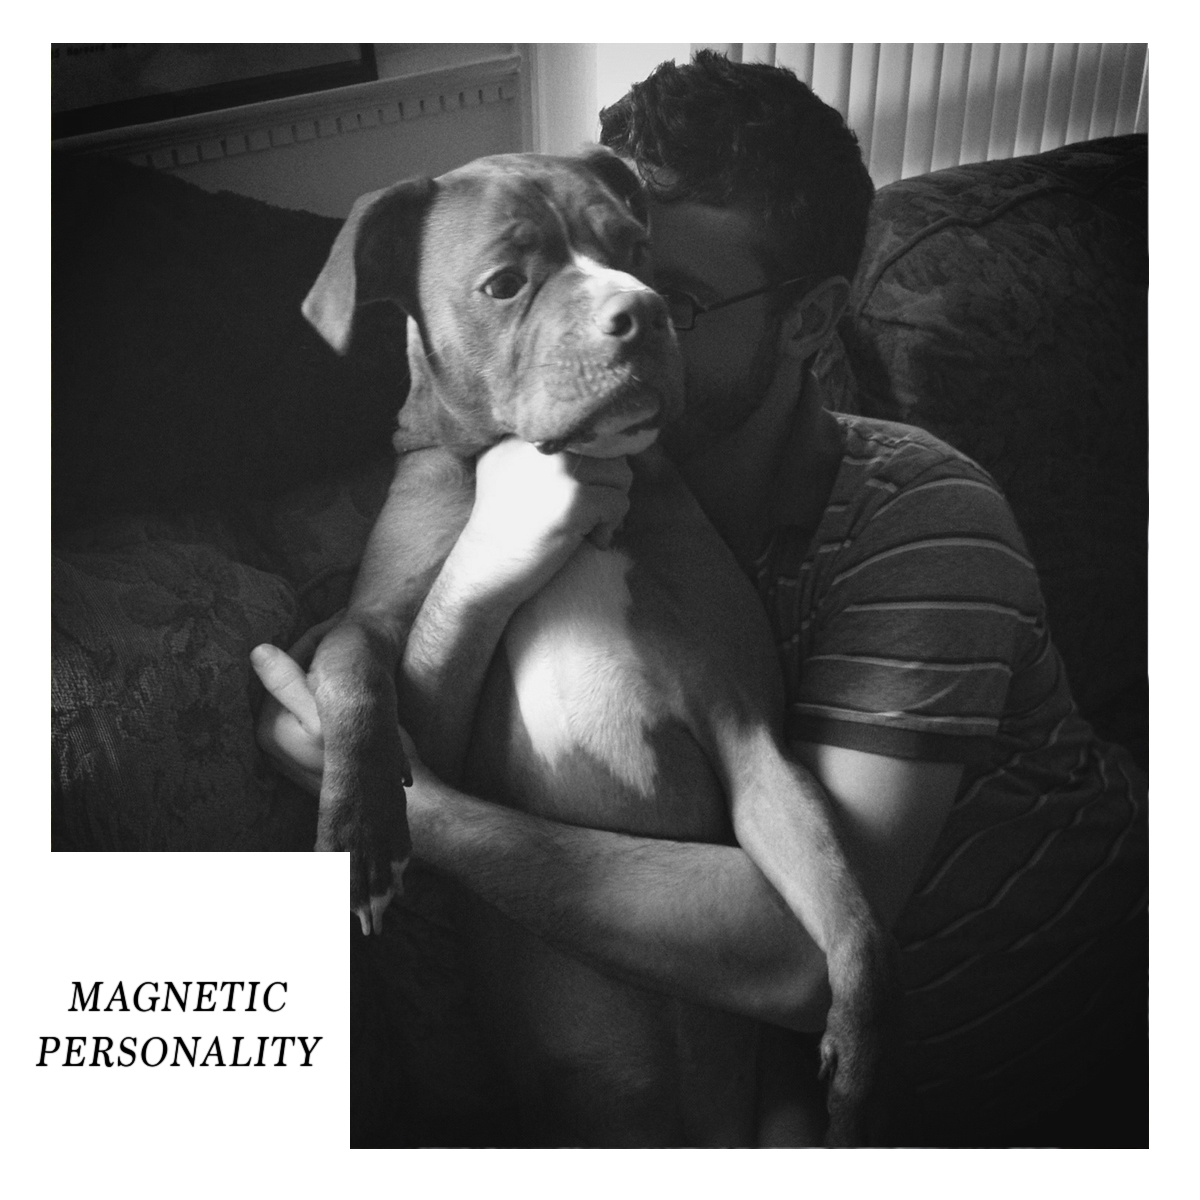 Newish Star Shares New Single, “Magnetic Personality”